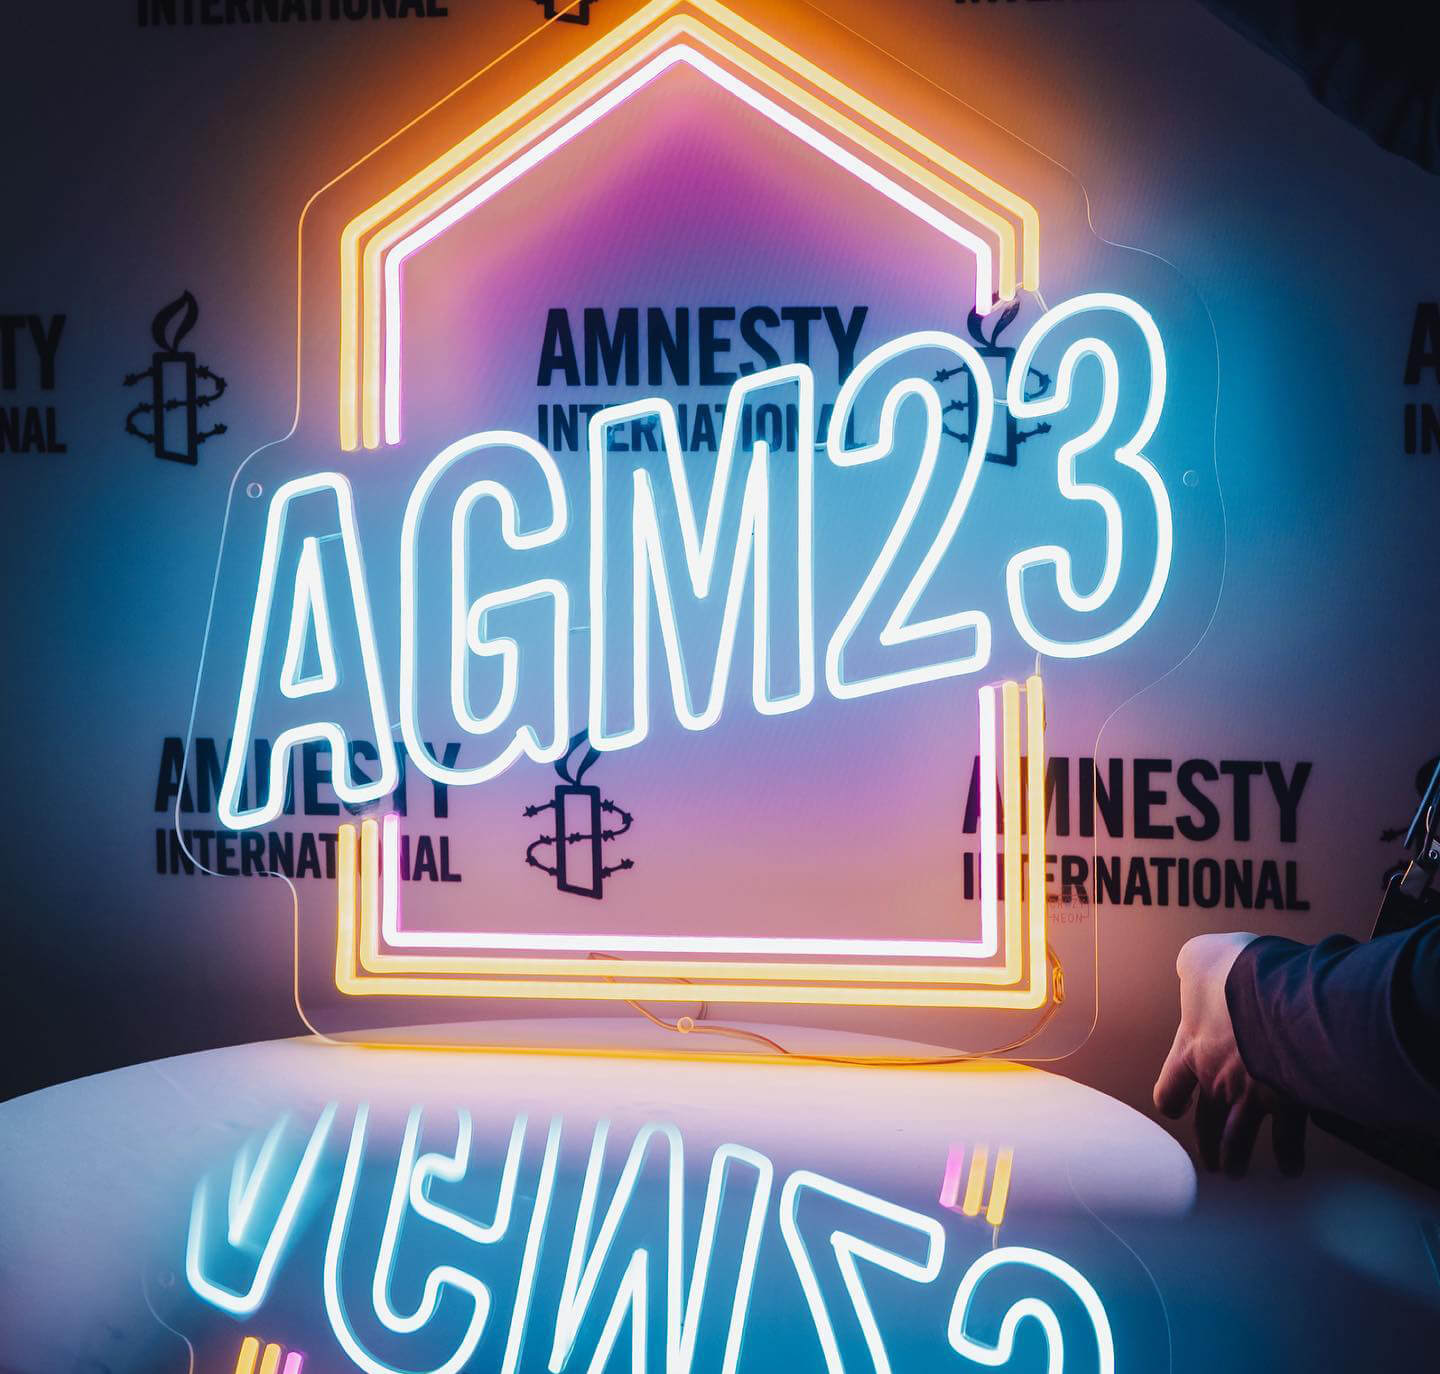 Custom neon sign created for AGM 2023